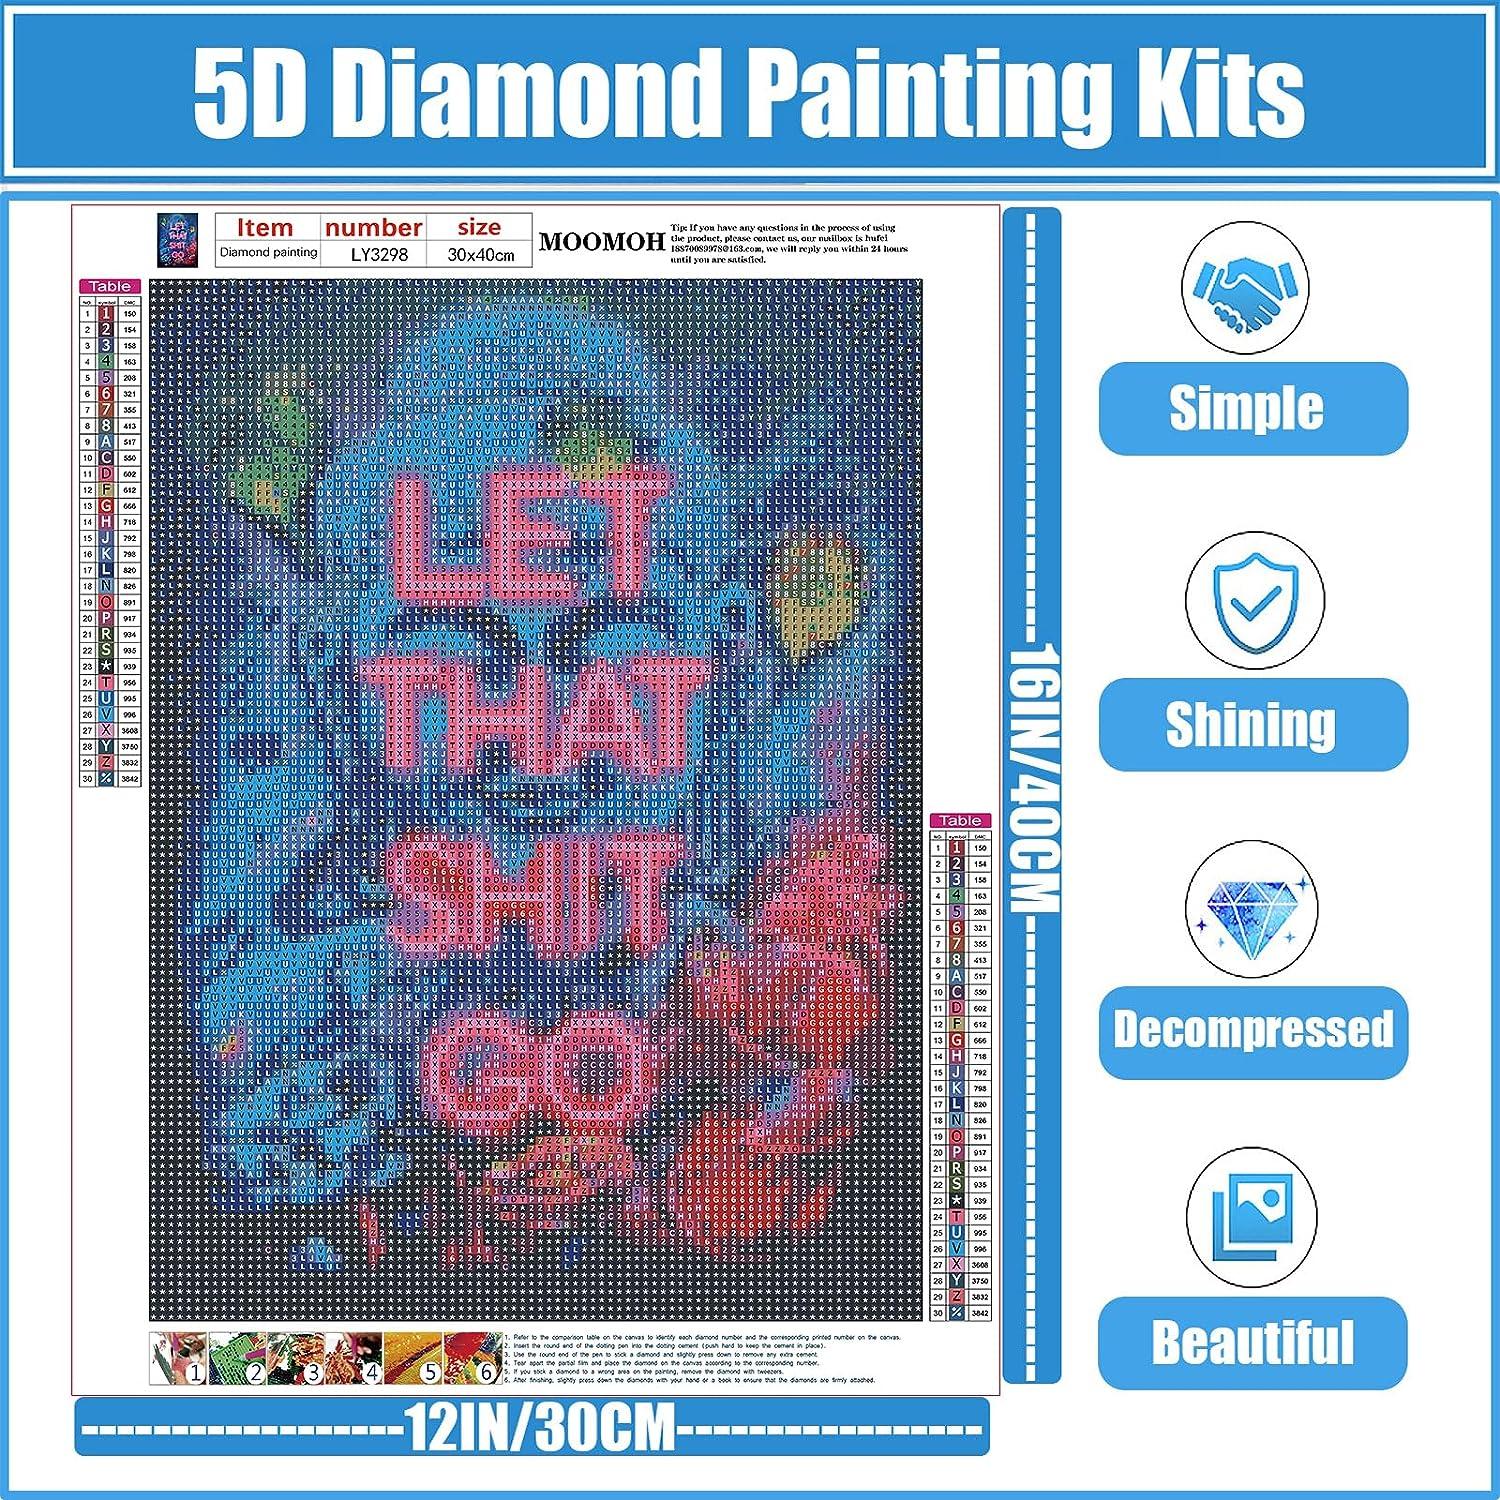 MOOMOH 5D Diamond Painting Kits for Adults - Let That Shit Go